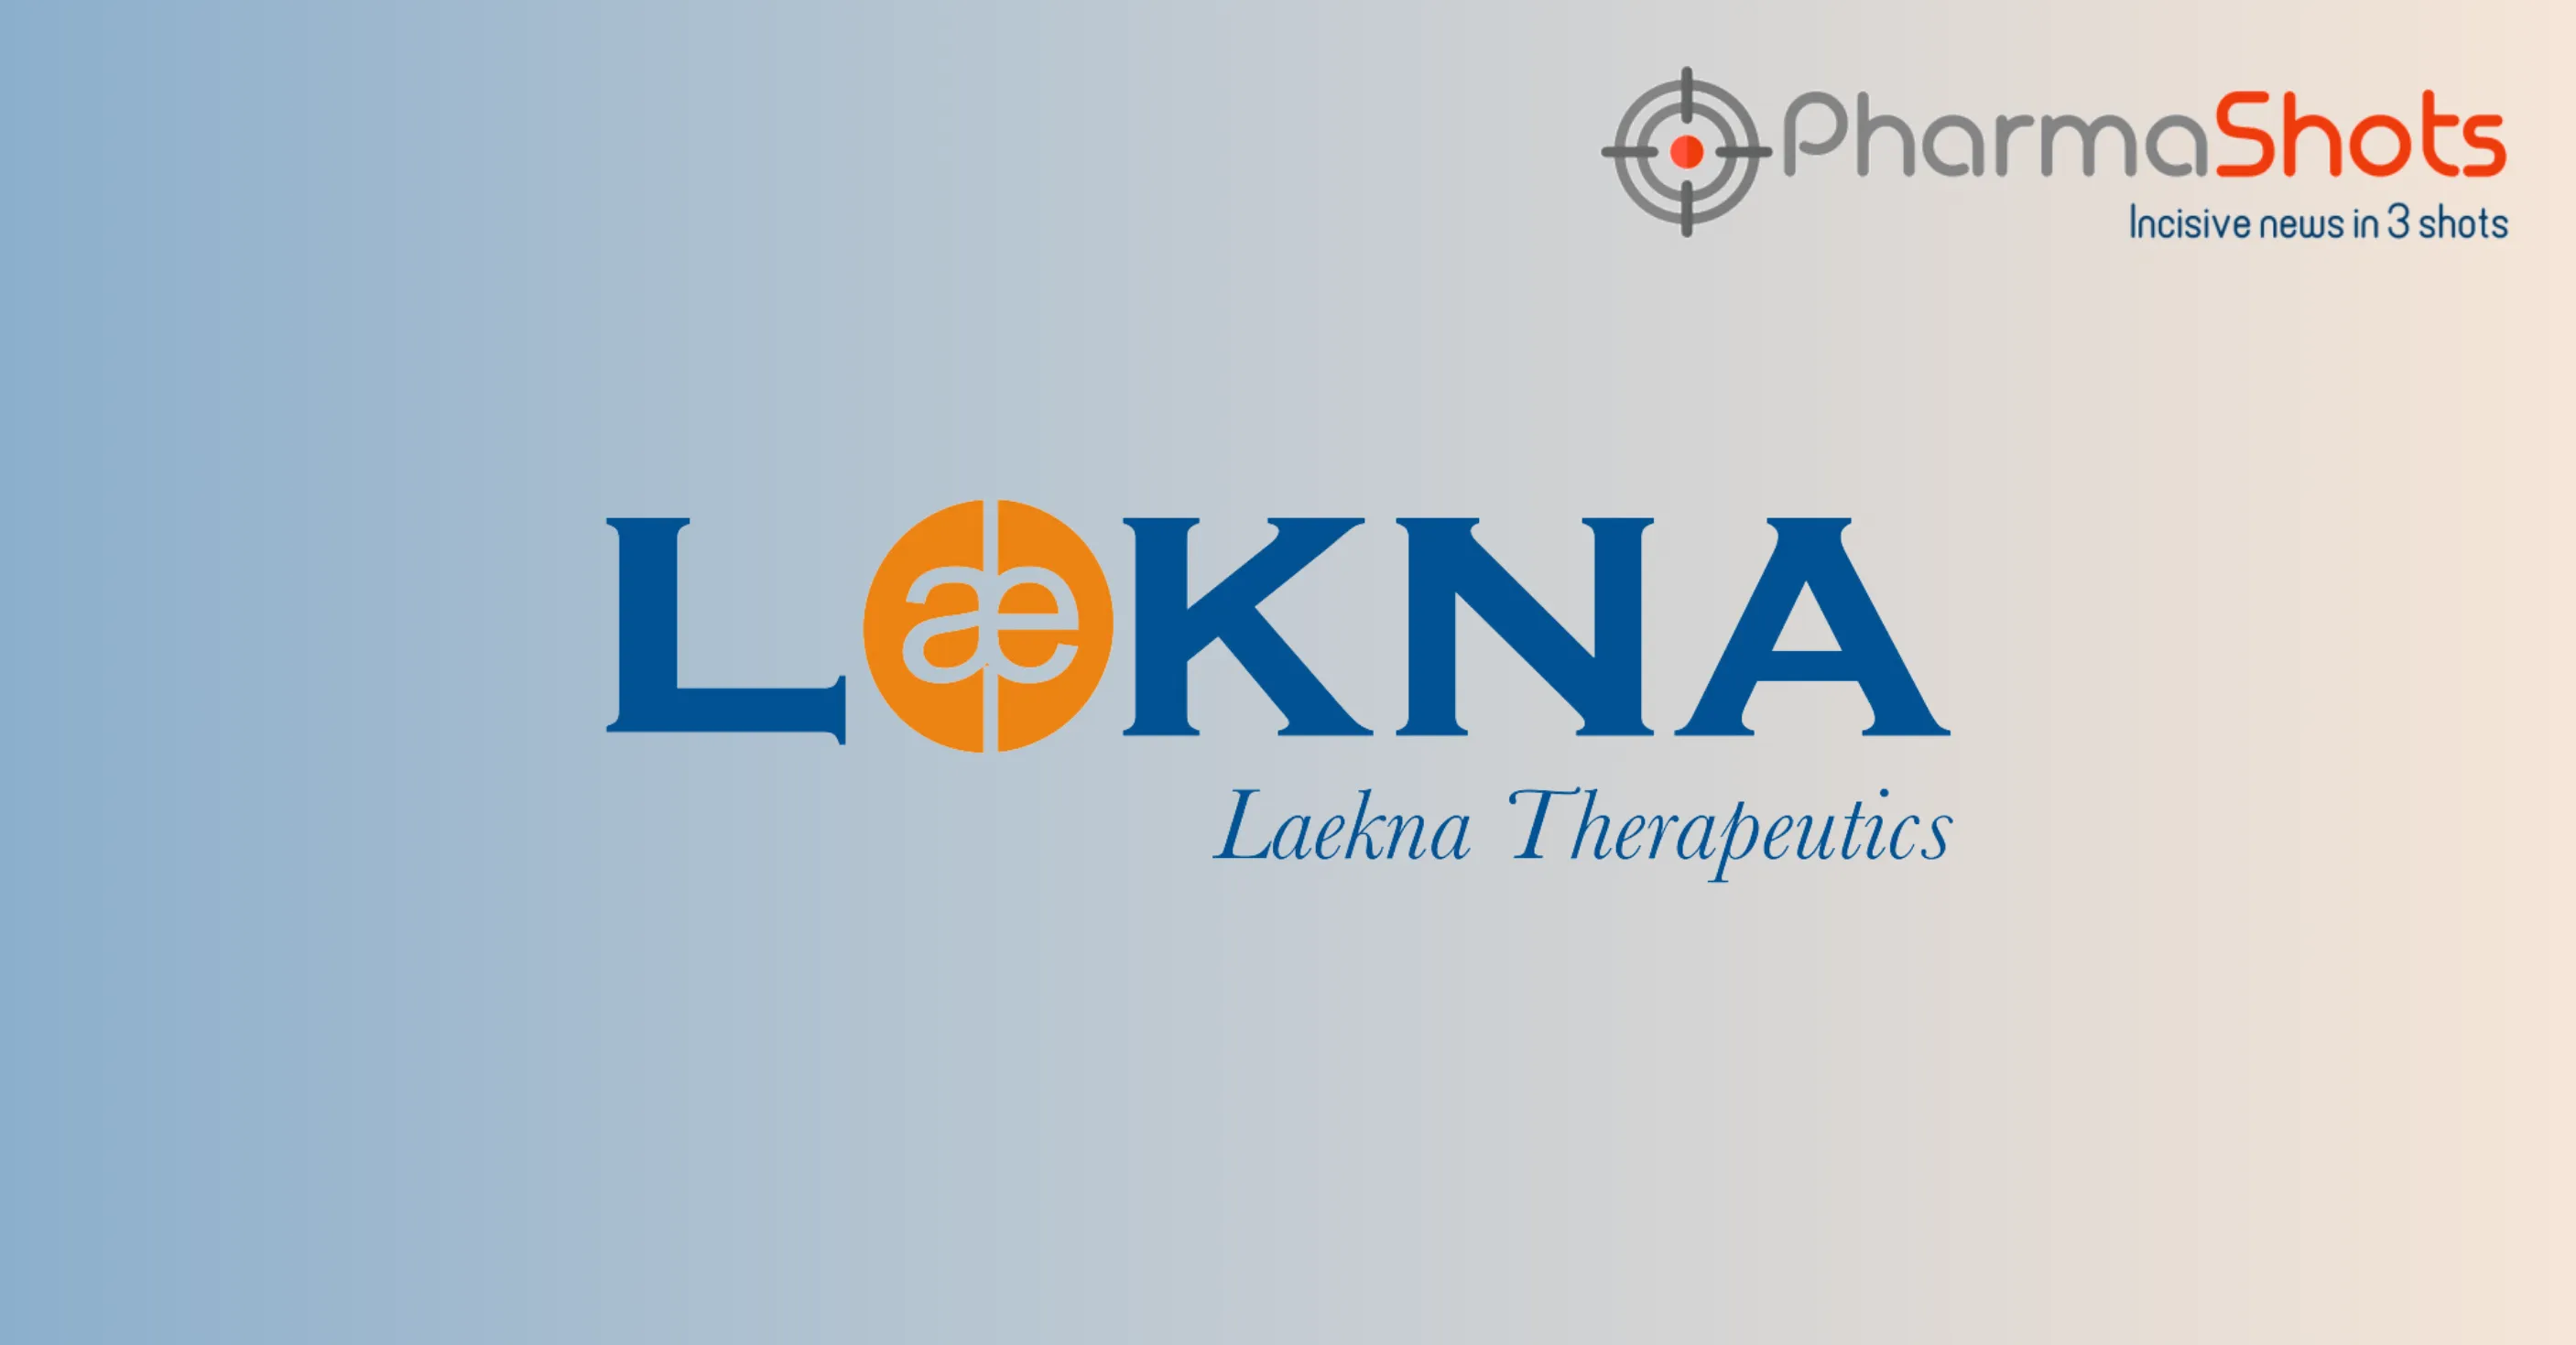 Laekna’s LAE002(Afuresertib) + LAE001 Receives FDA Approval for P-III Trial Protocol to Treat Prostate Cancer